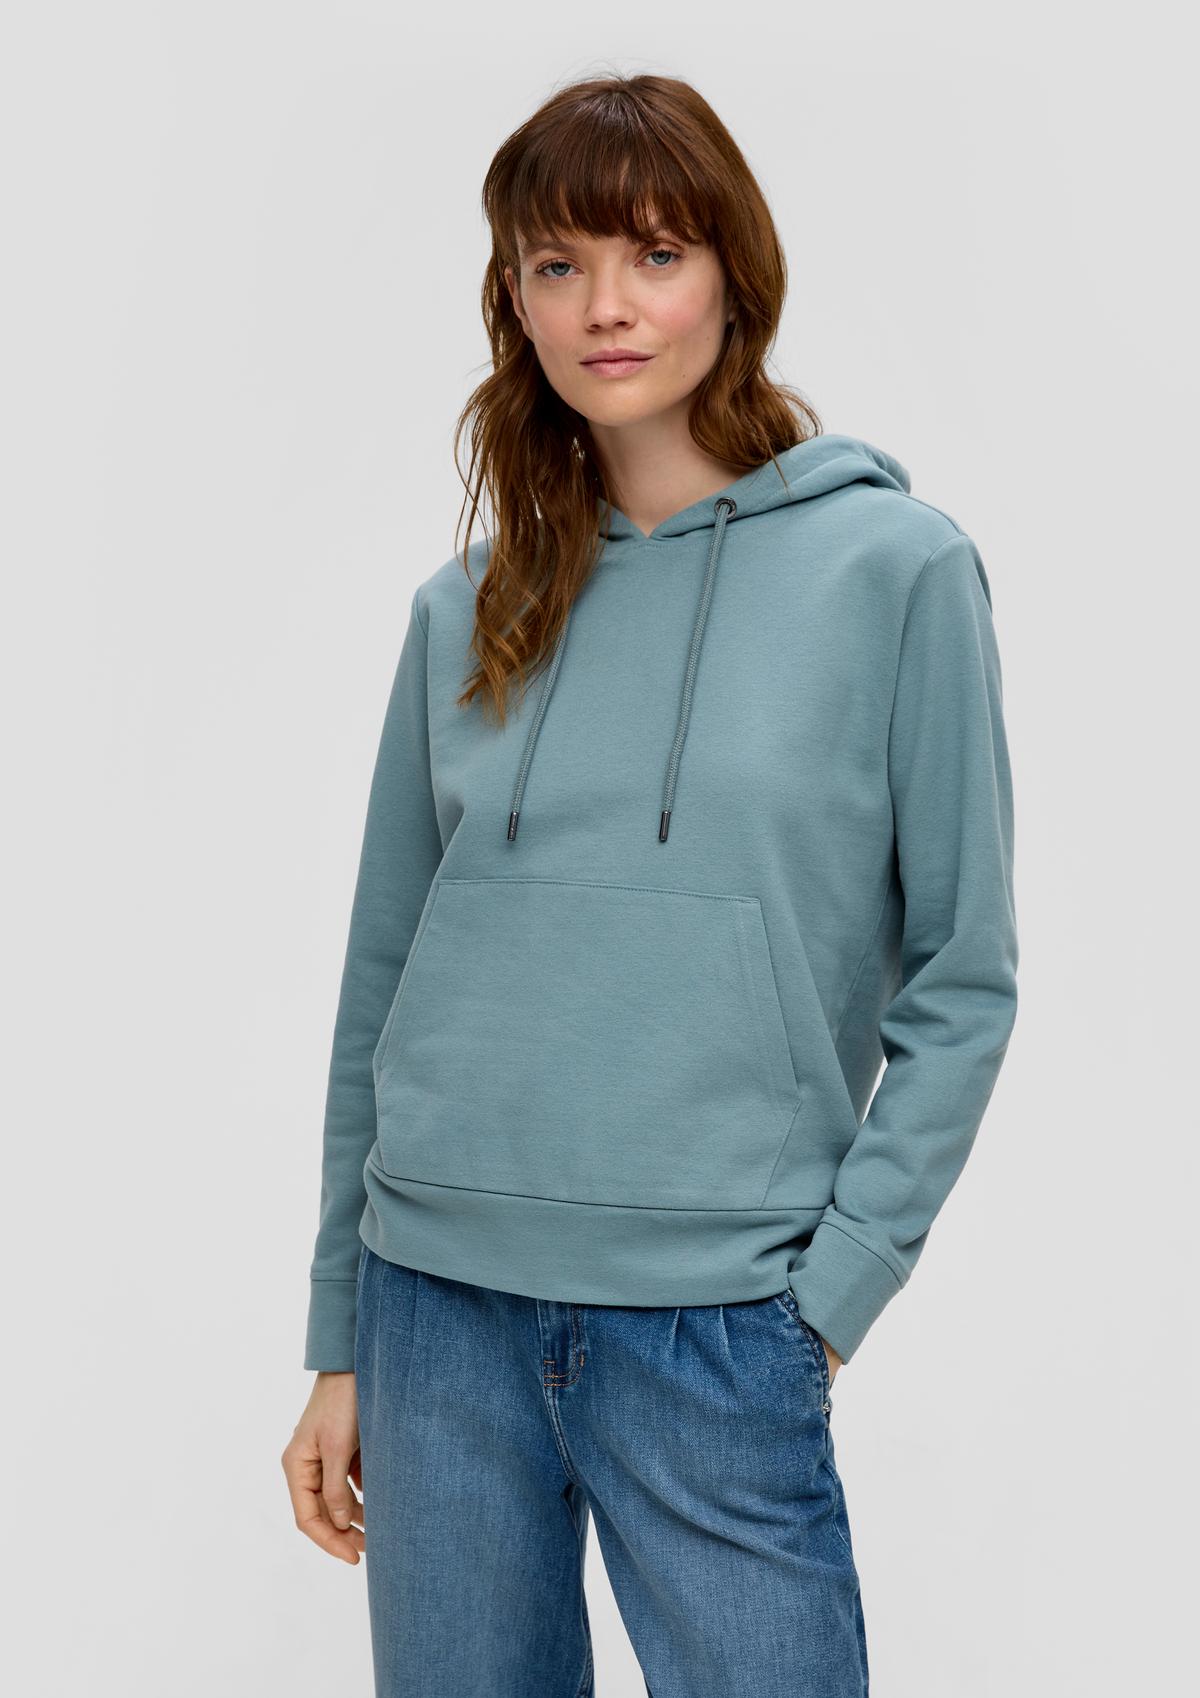 s.Oliver Hooded sweatshirt made of a cotton blend